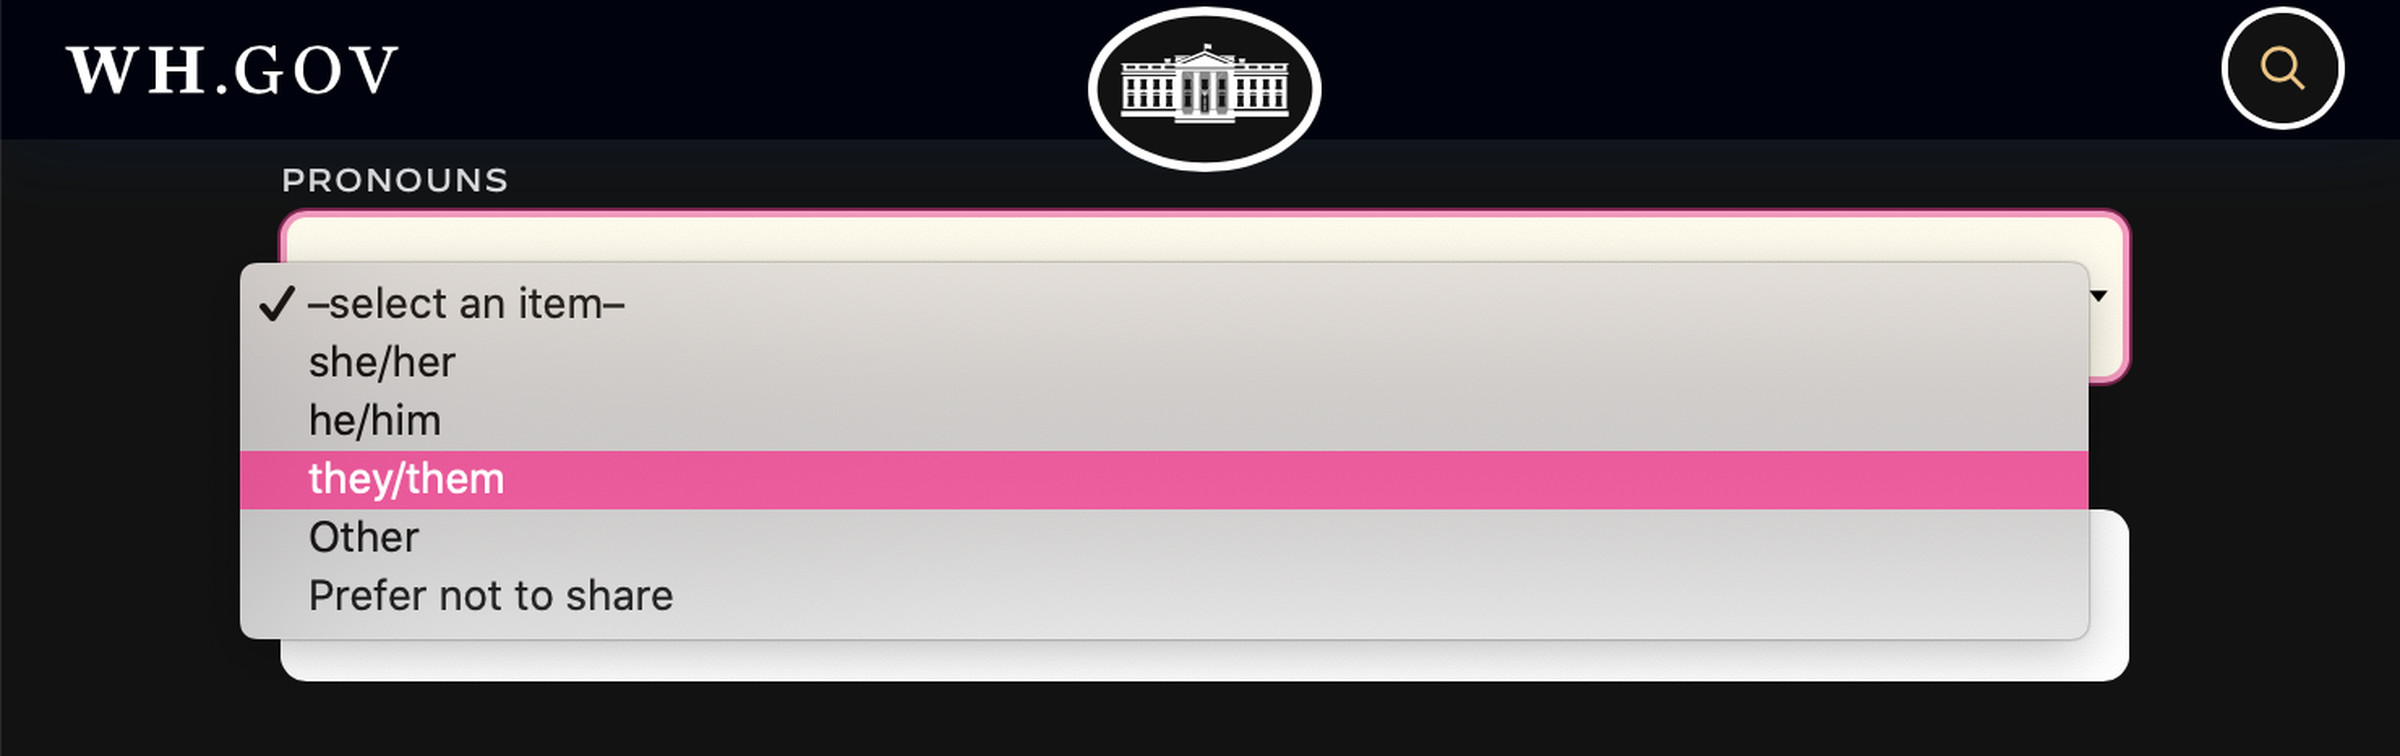 Dropdown menu on the White House contact page that allows the user to select their pronouns.